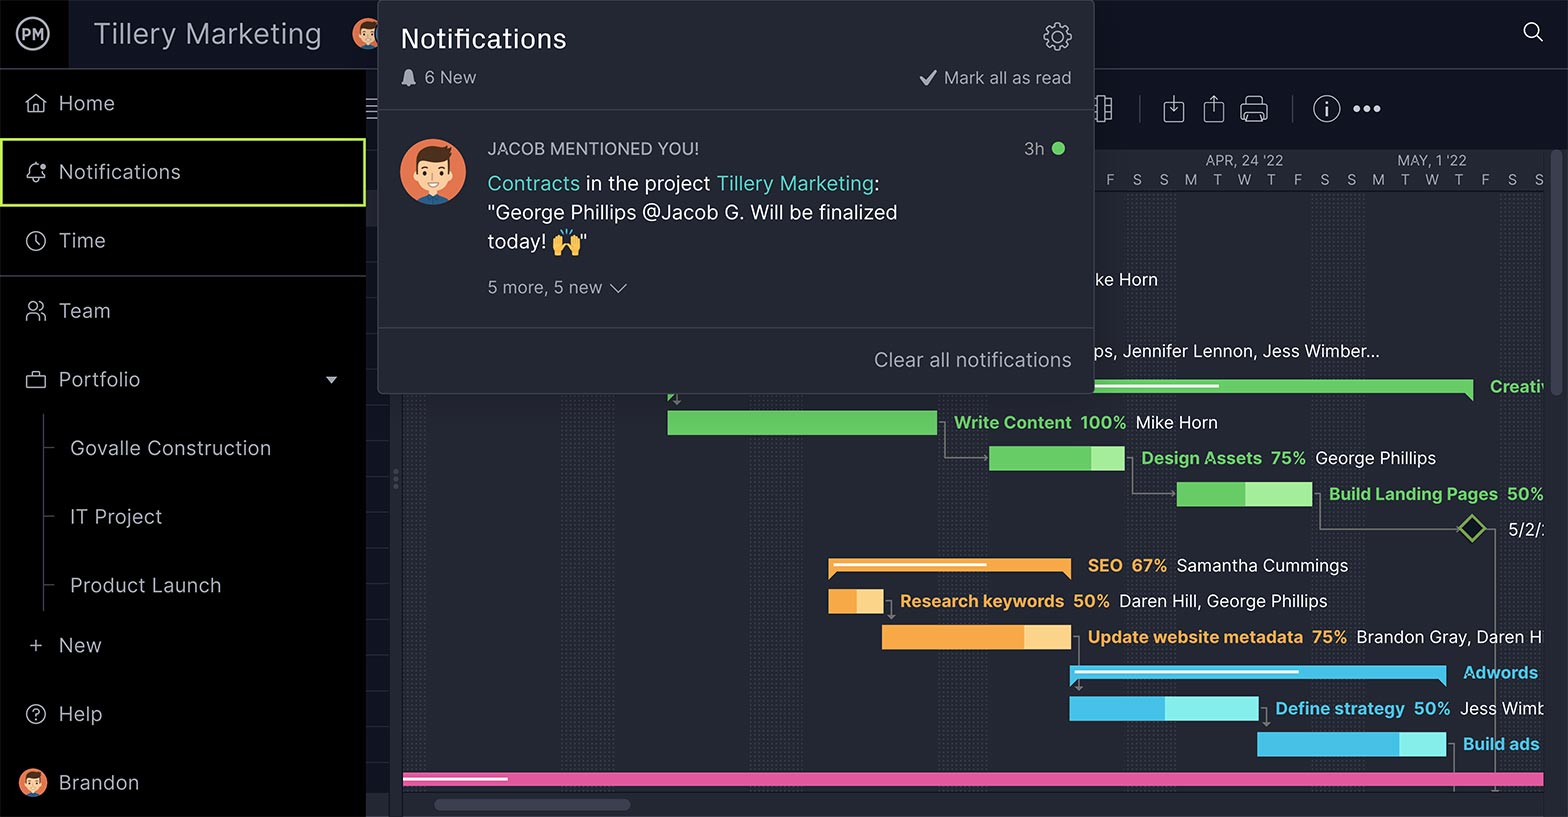 ProjectManager's notifications help scrum teams communicate better